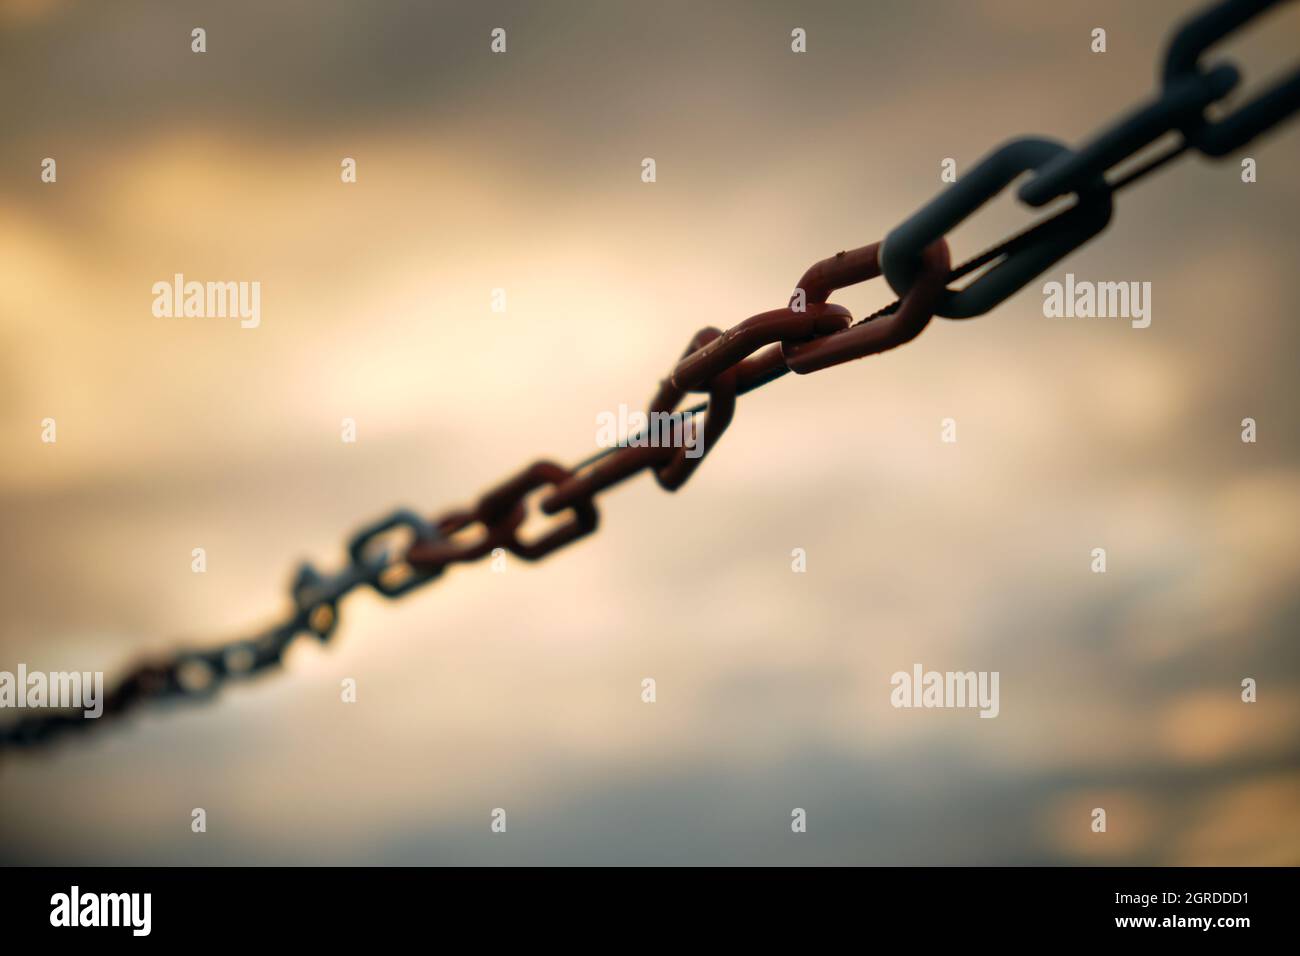 Moody close-up of plastic chain barrier against sunset sky. Seen in Germany in October Stock Photo